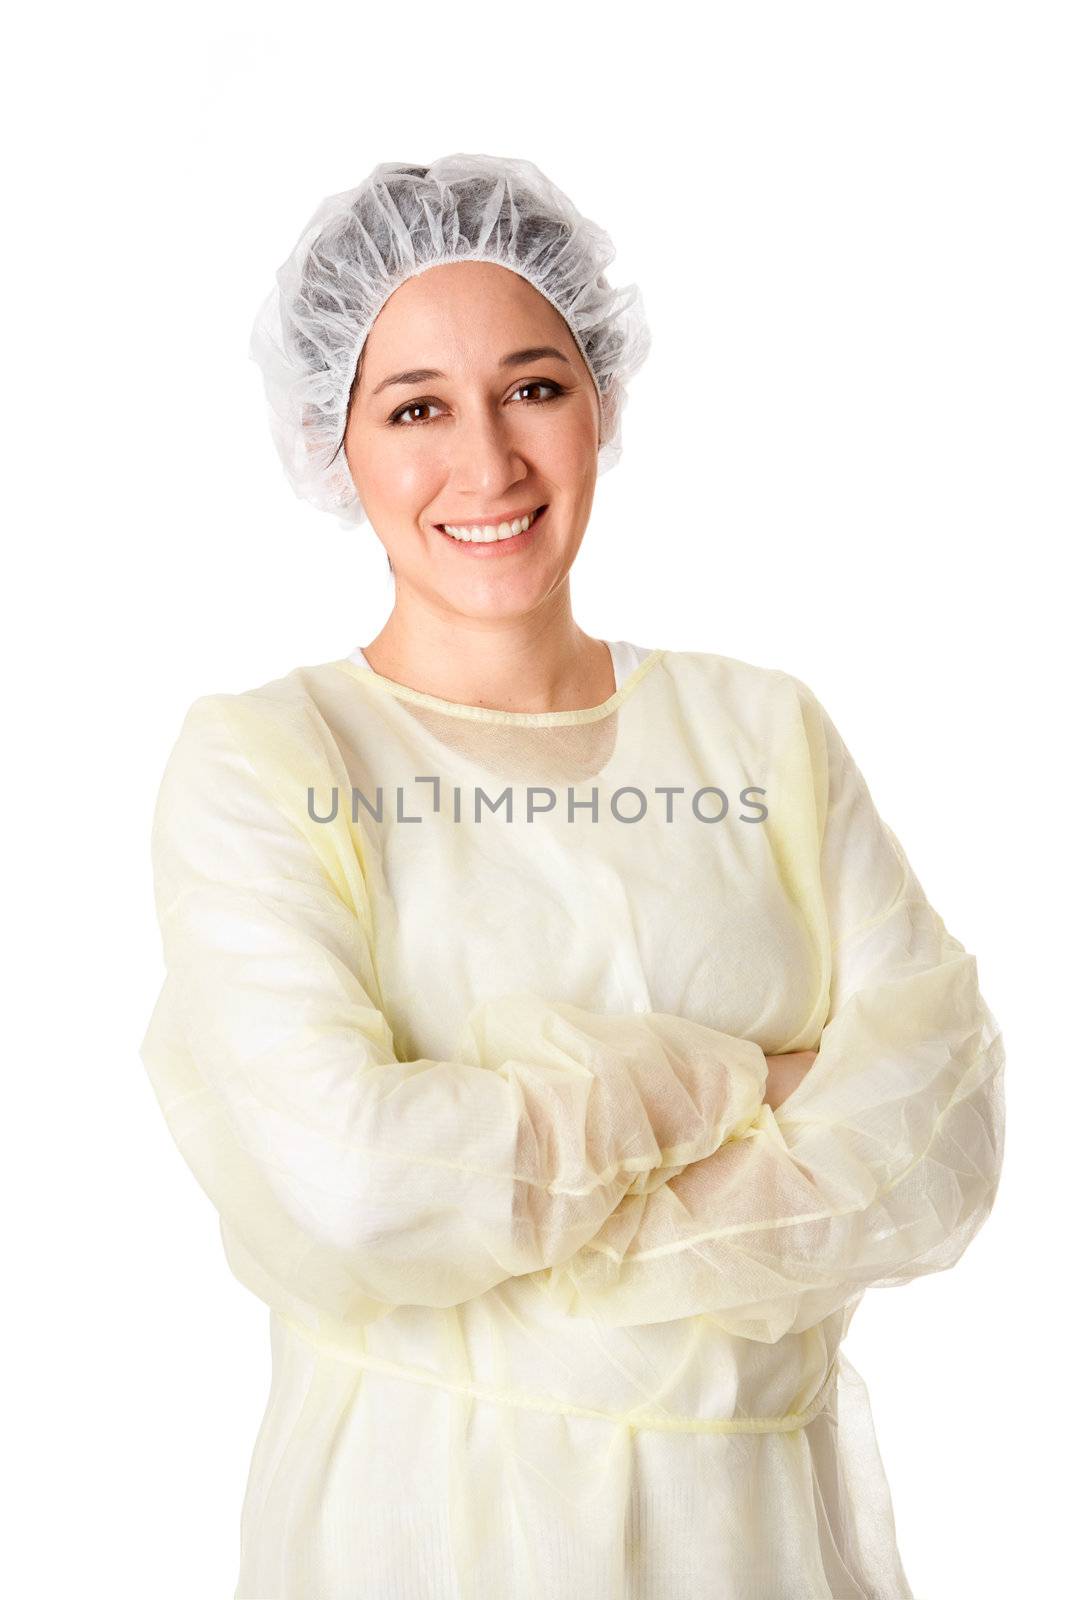 Happy smiling female medical assistant for a surgical team or dentist wearing yellow scrubs and white hair net standing with arms crossed, isolated.